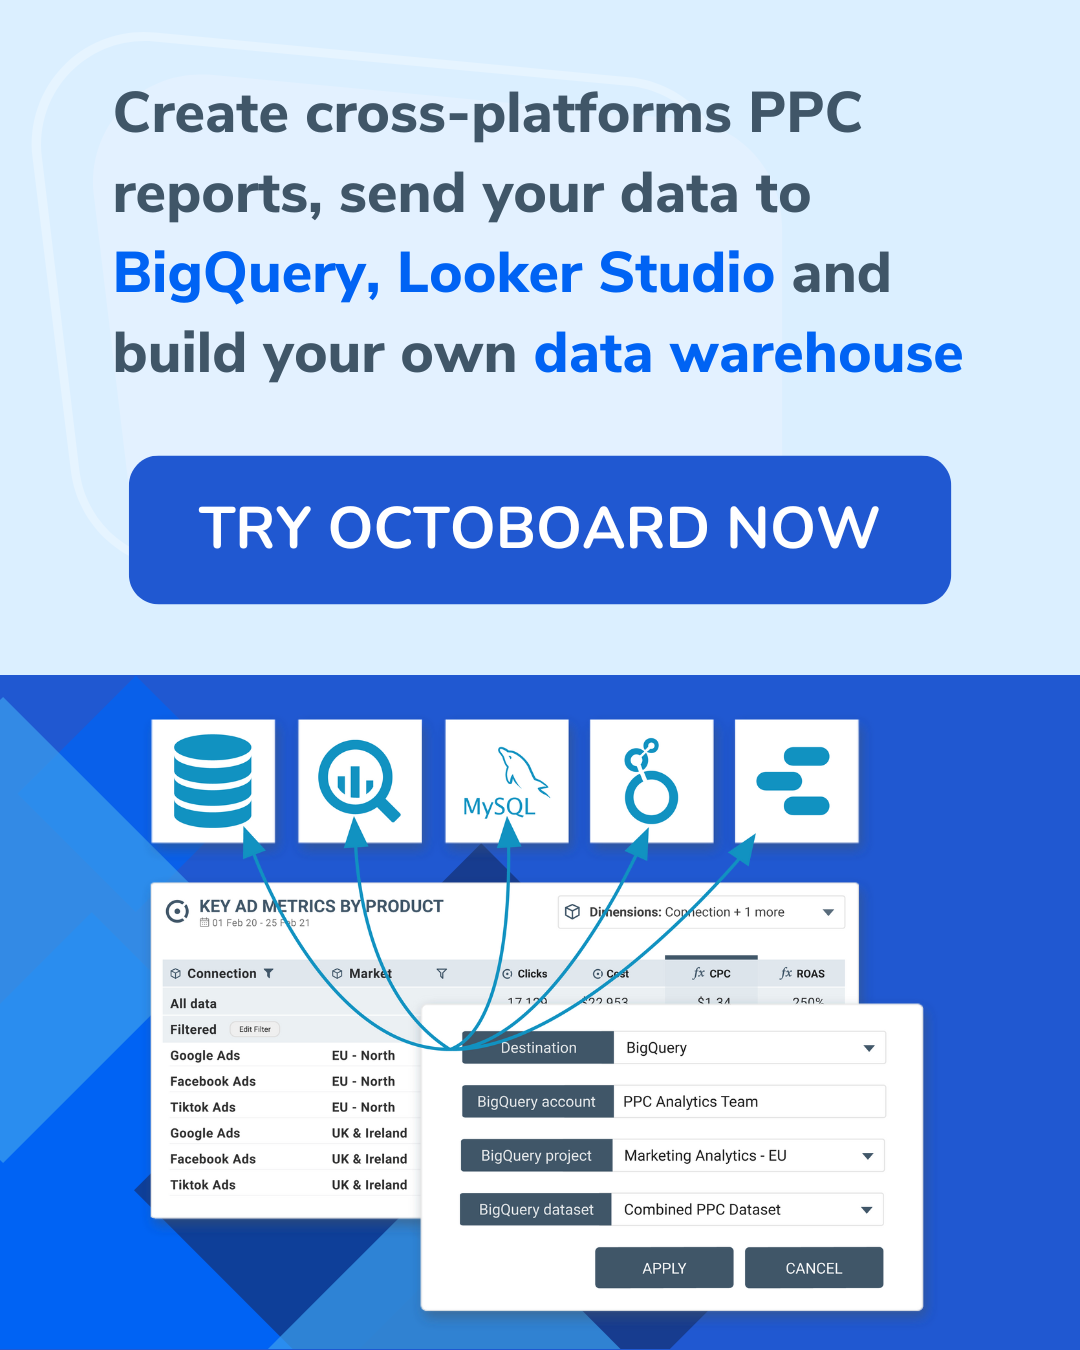 Create cross-platform PPC reports, send your data to BigQuery, Looker Studio and build your own data warehouse.